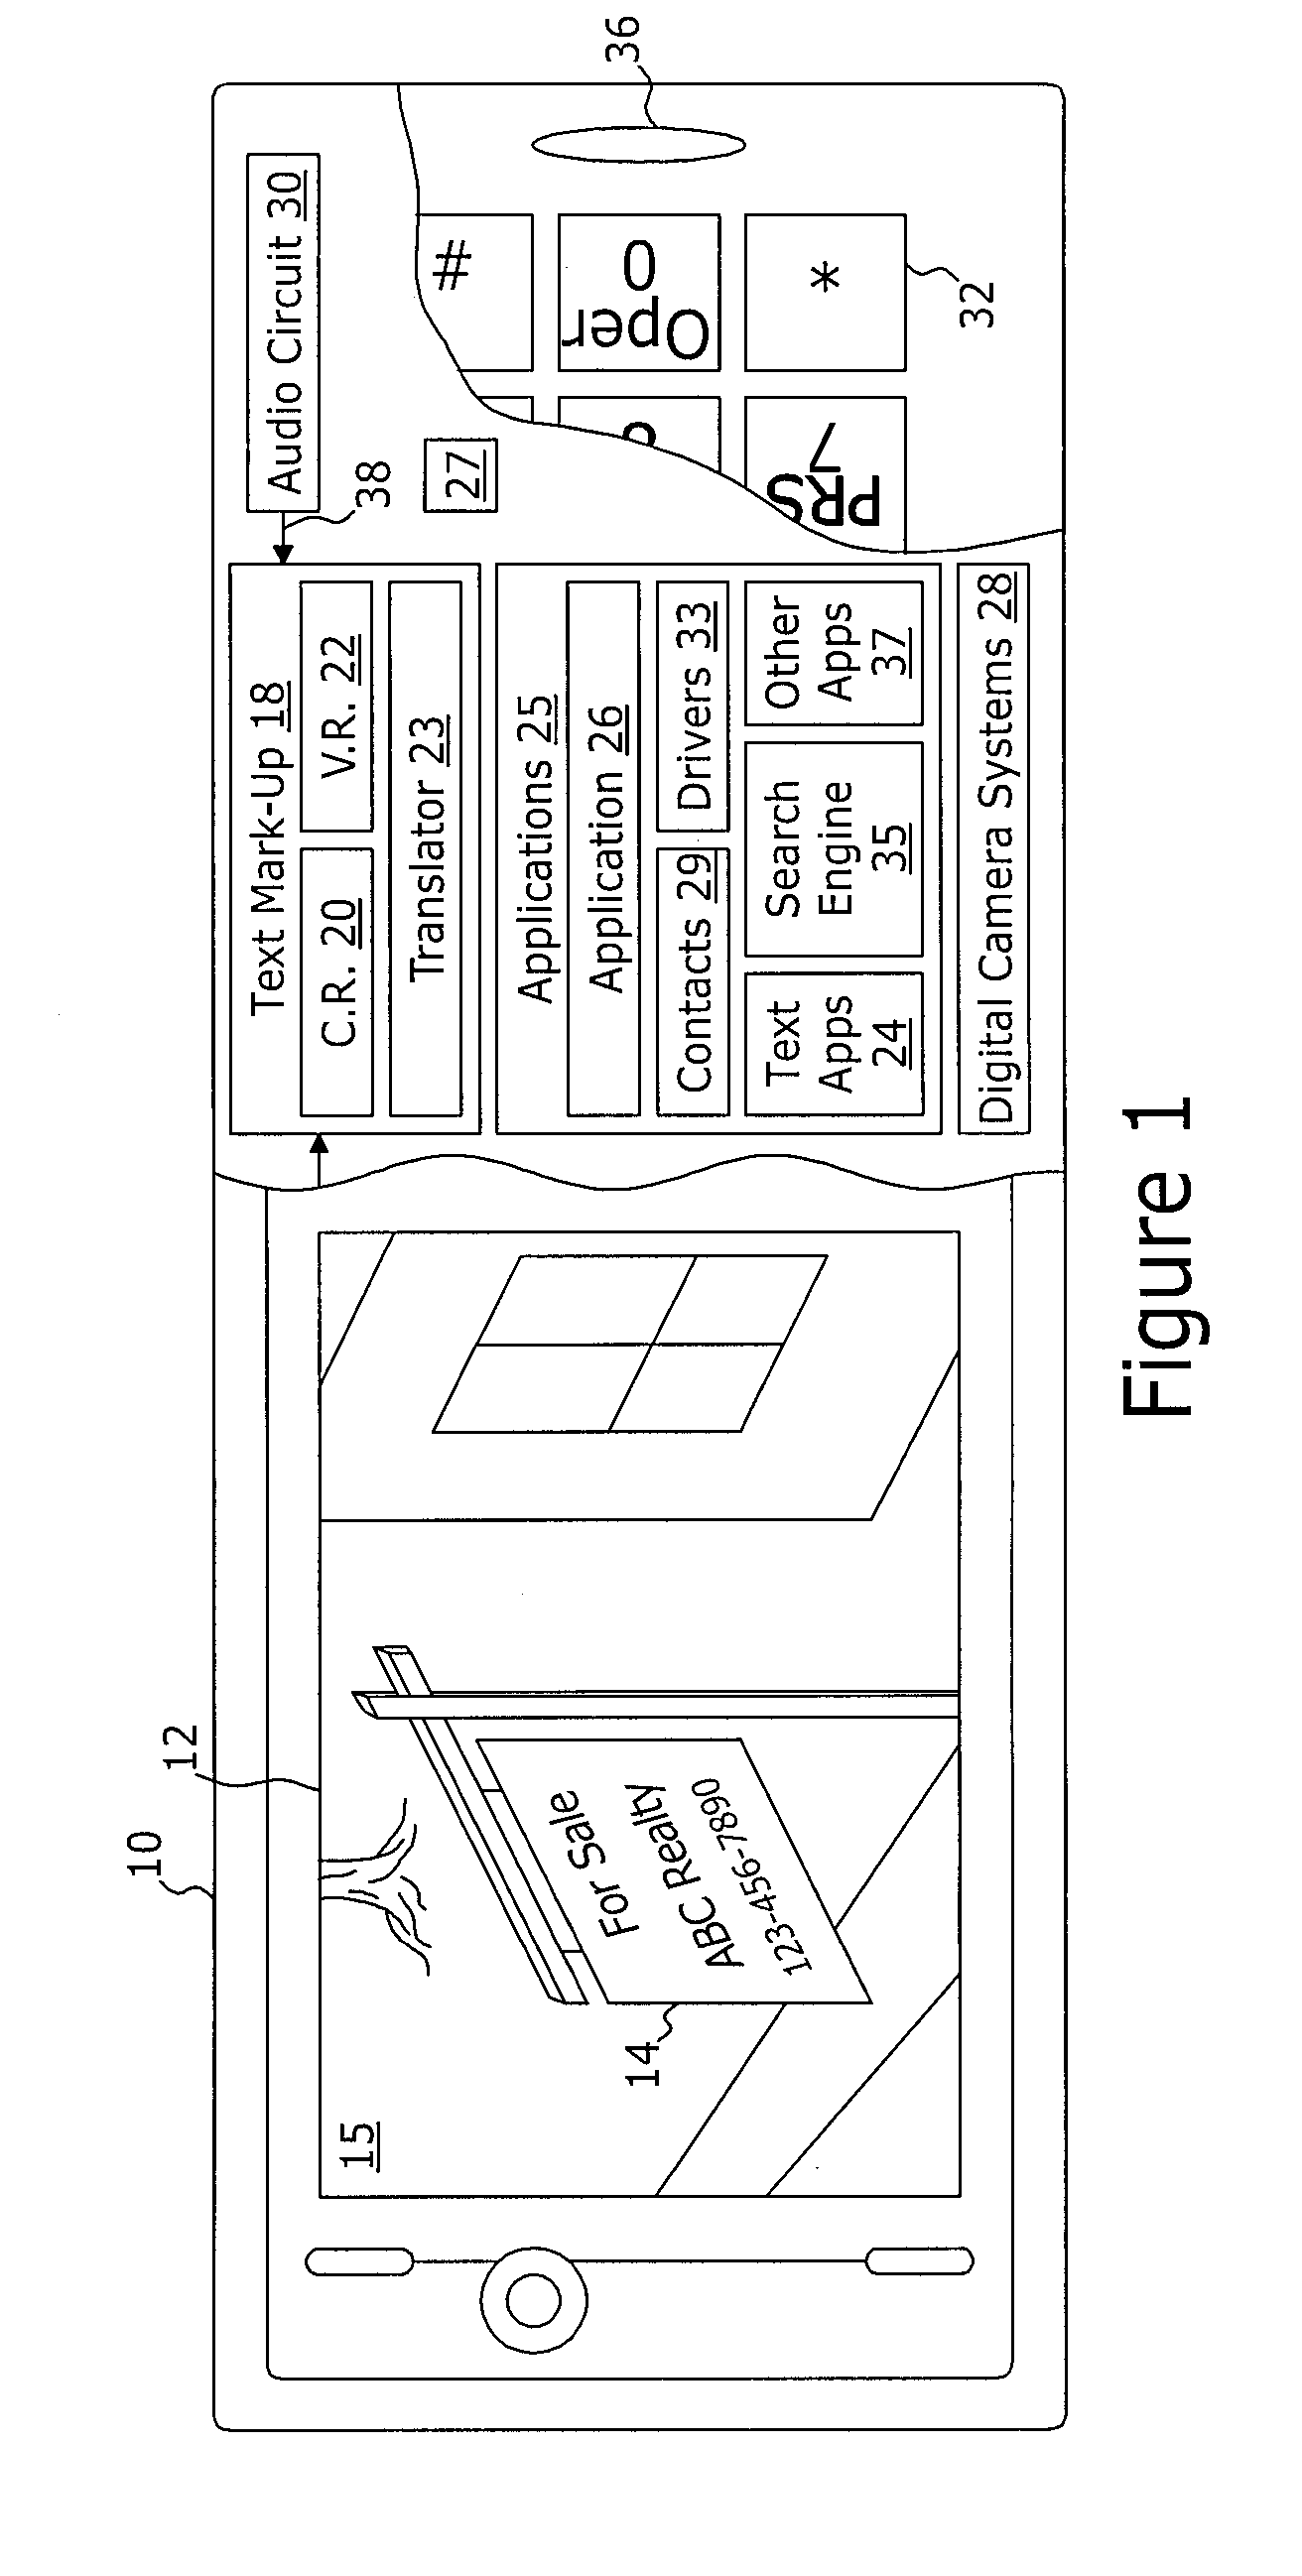 System and method for input of text to an application operating on a device